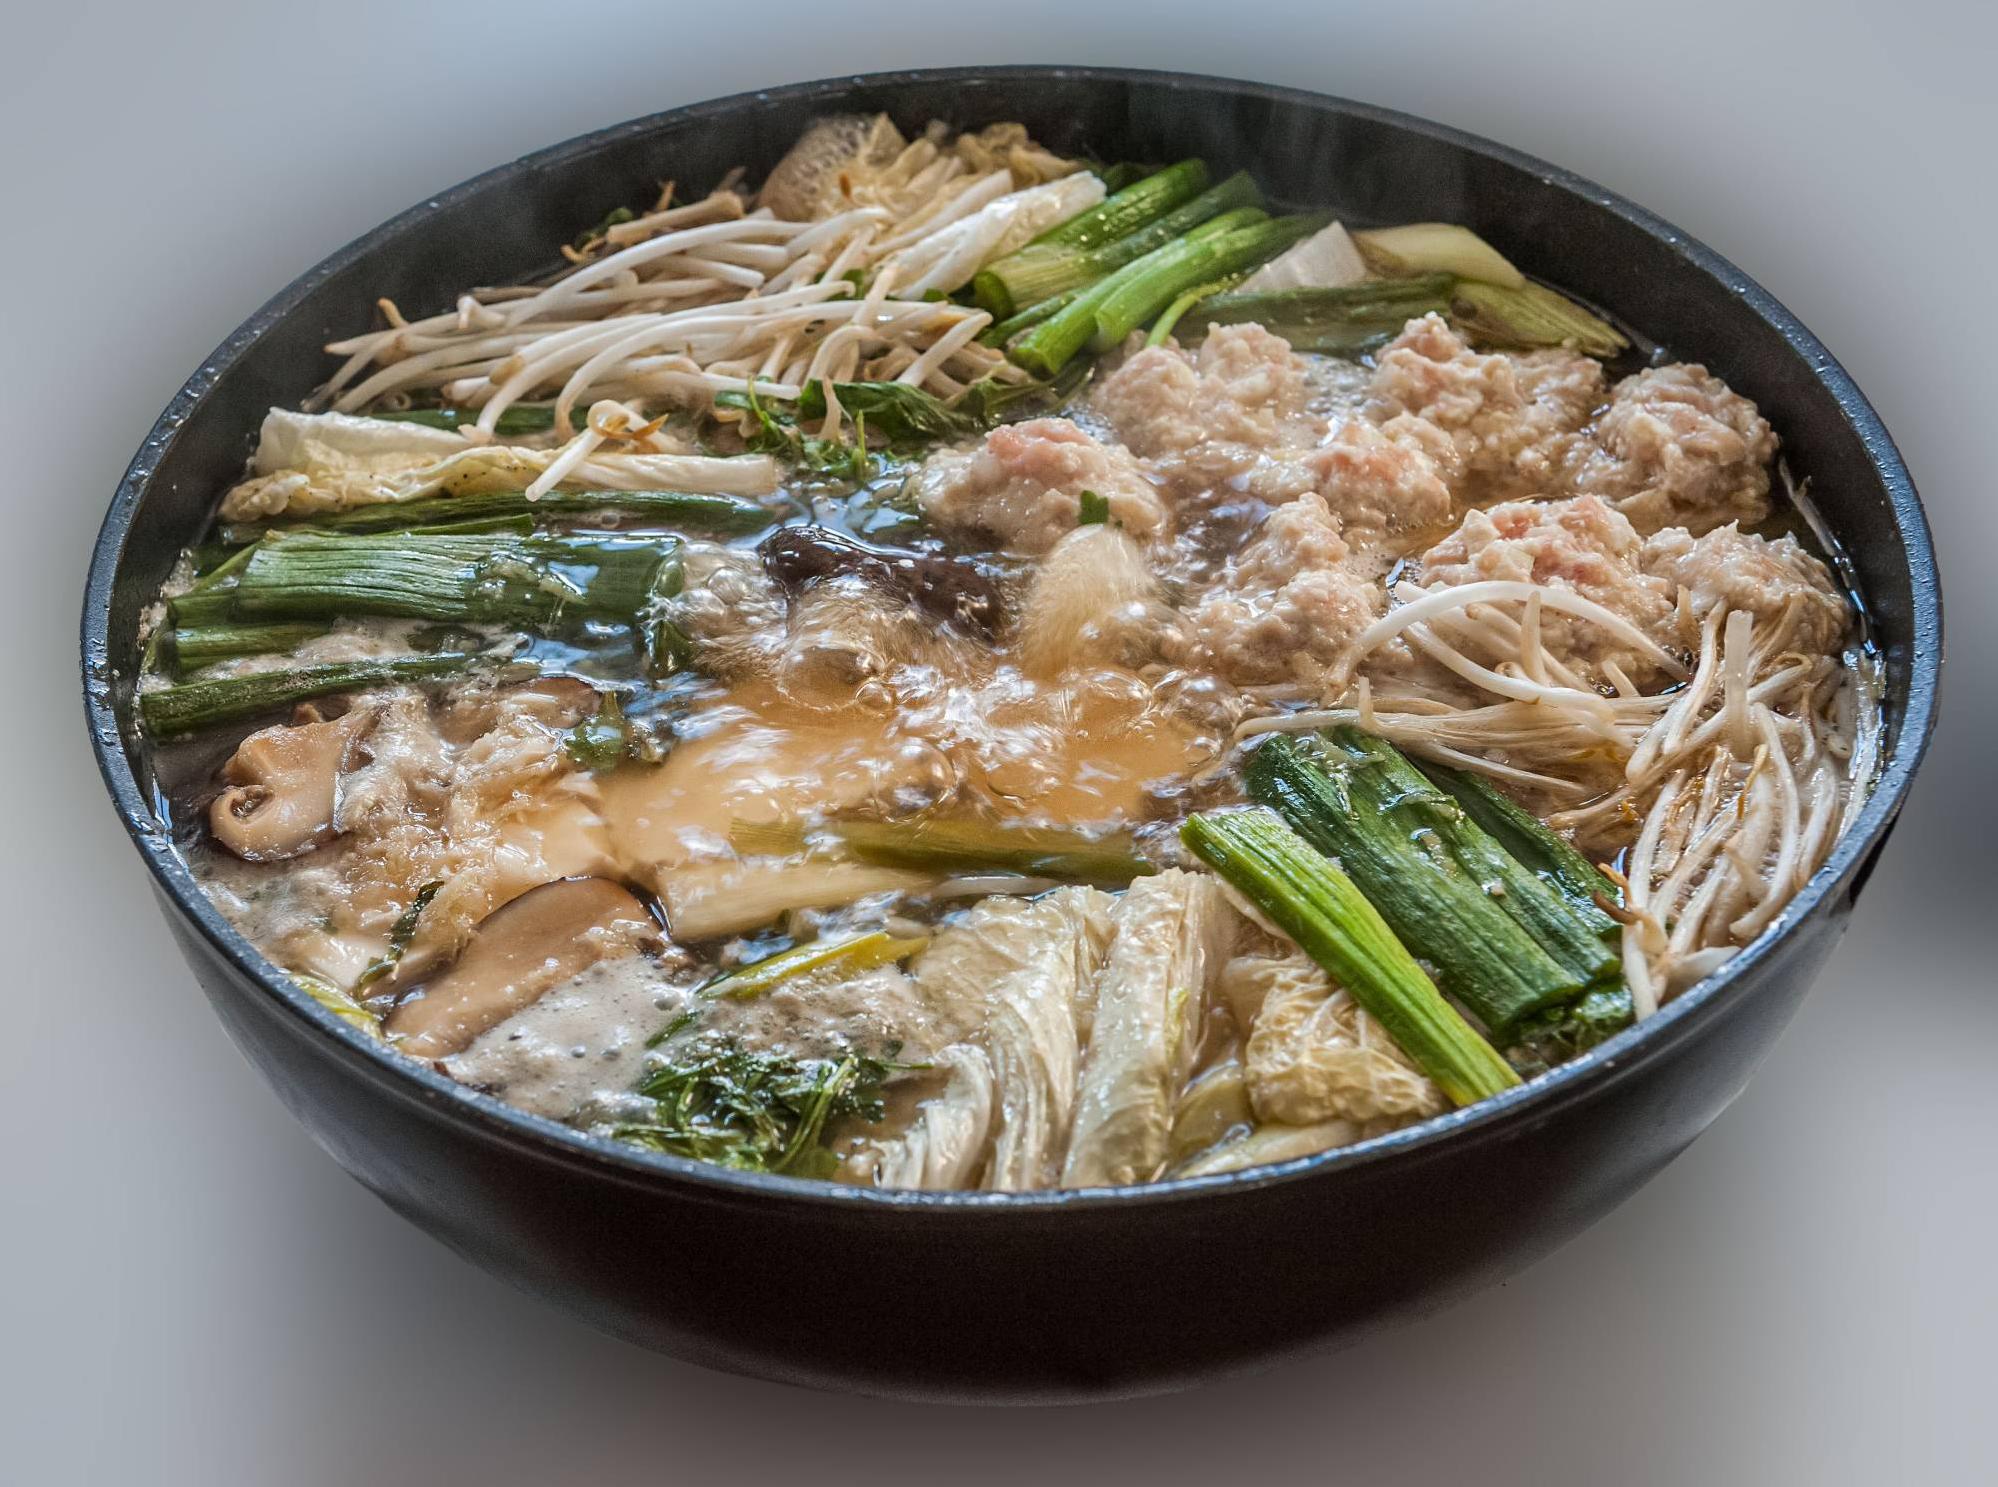  This hot pot is the perfect meal for sharing with friends and family.